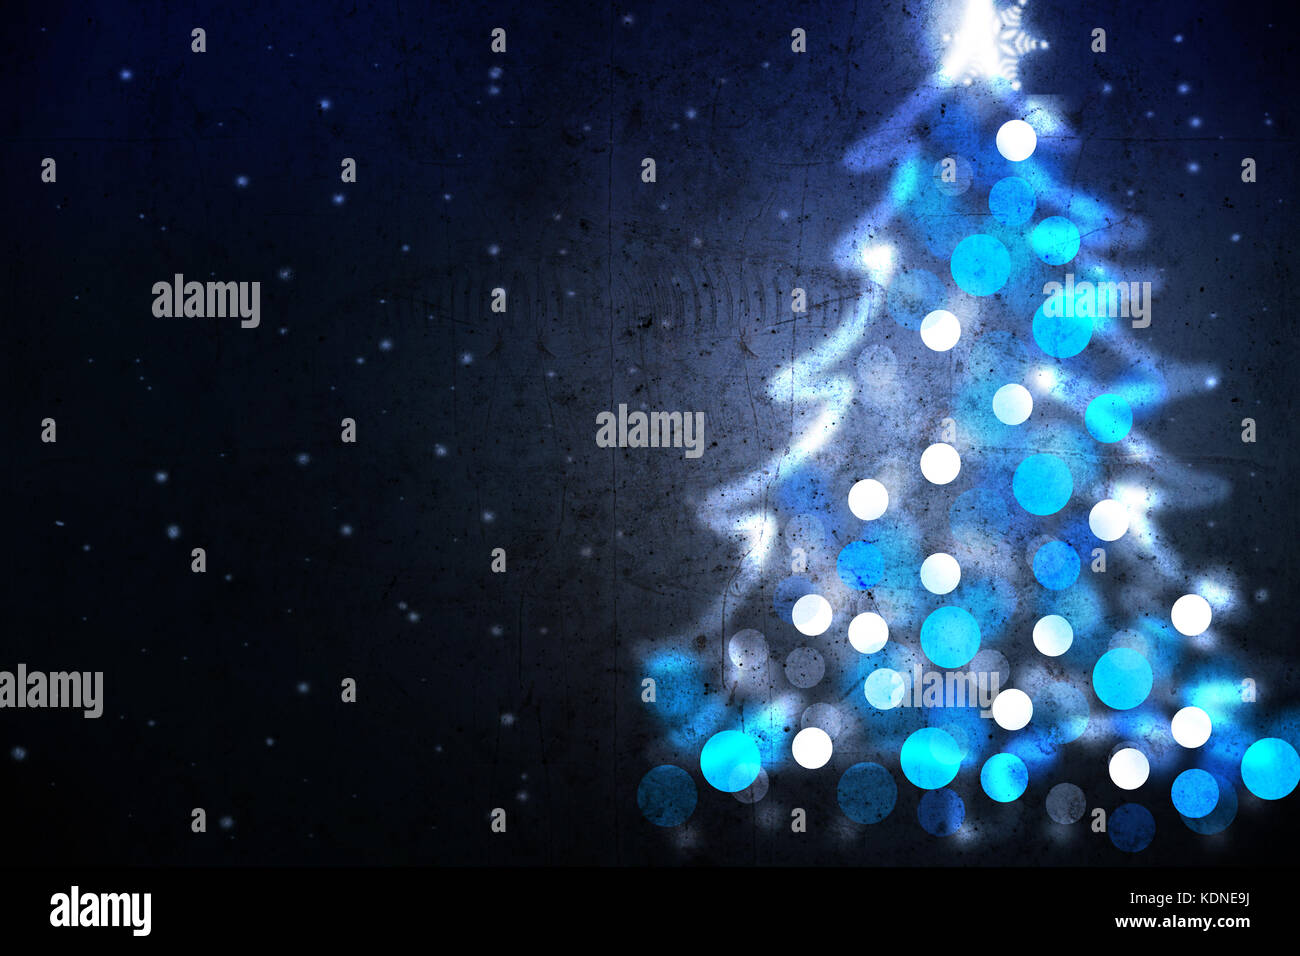 Winter holiday background with blue Christmas tree shape from lights Stock Photo